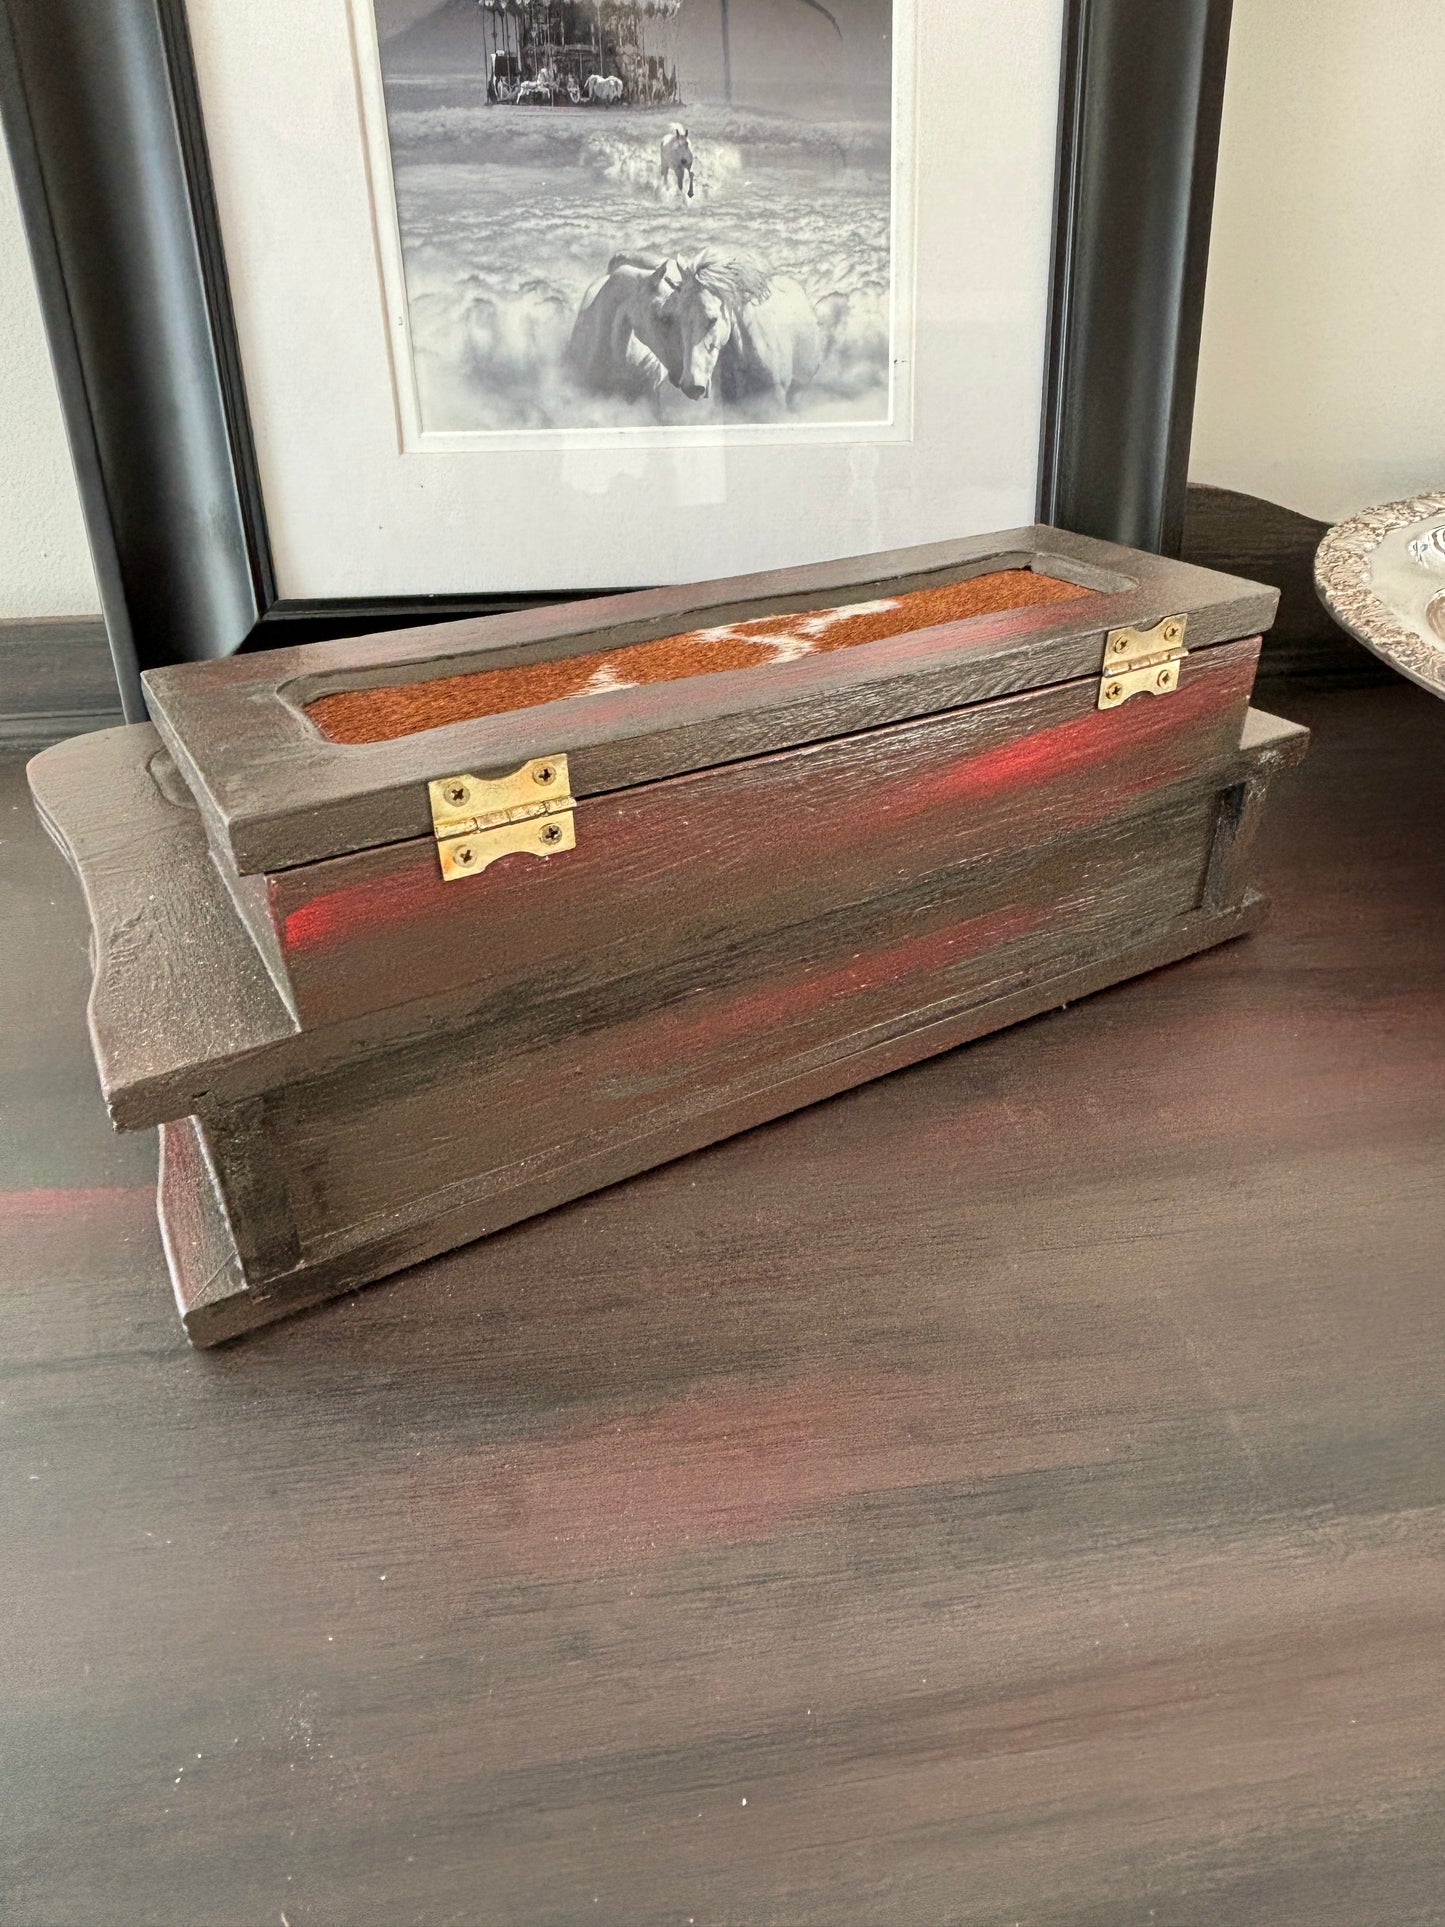 UpCycled Vintage Wood and Leather Valet Jewelry Box , Dresser Valet , Vintage Jewelry Box , Valet Tray Organizer